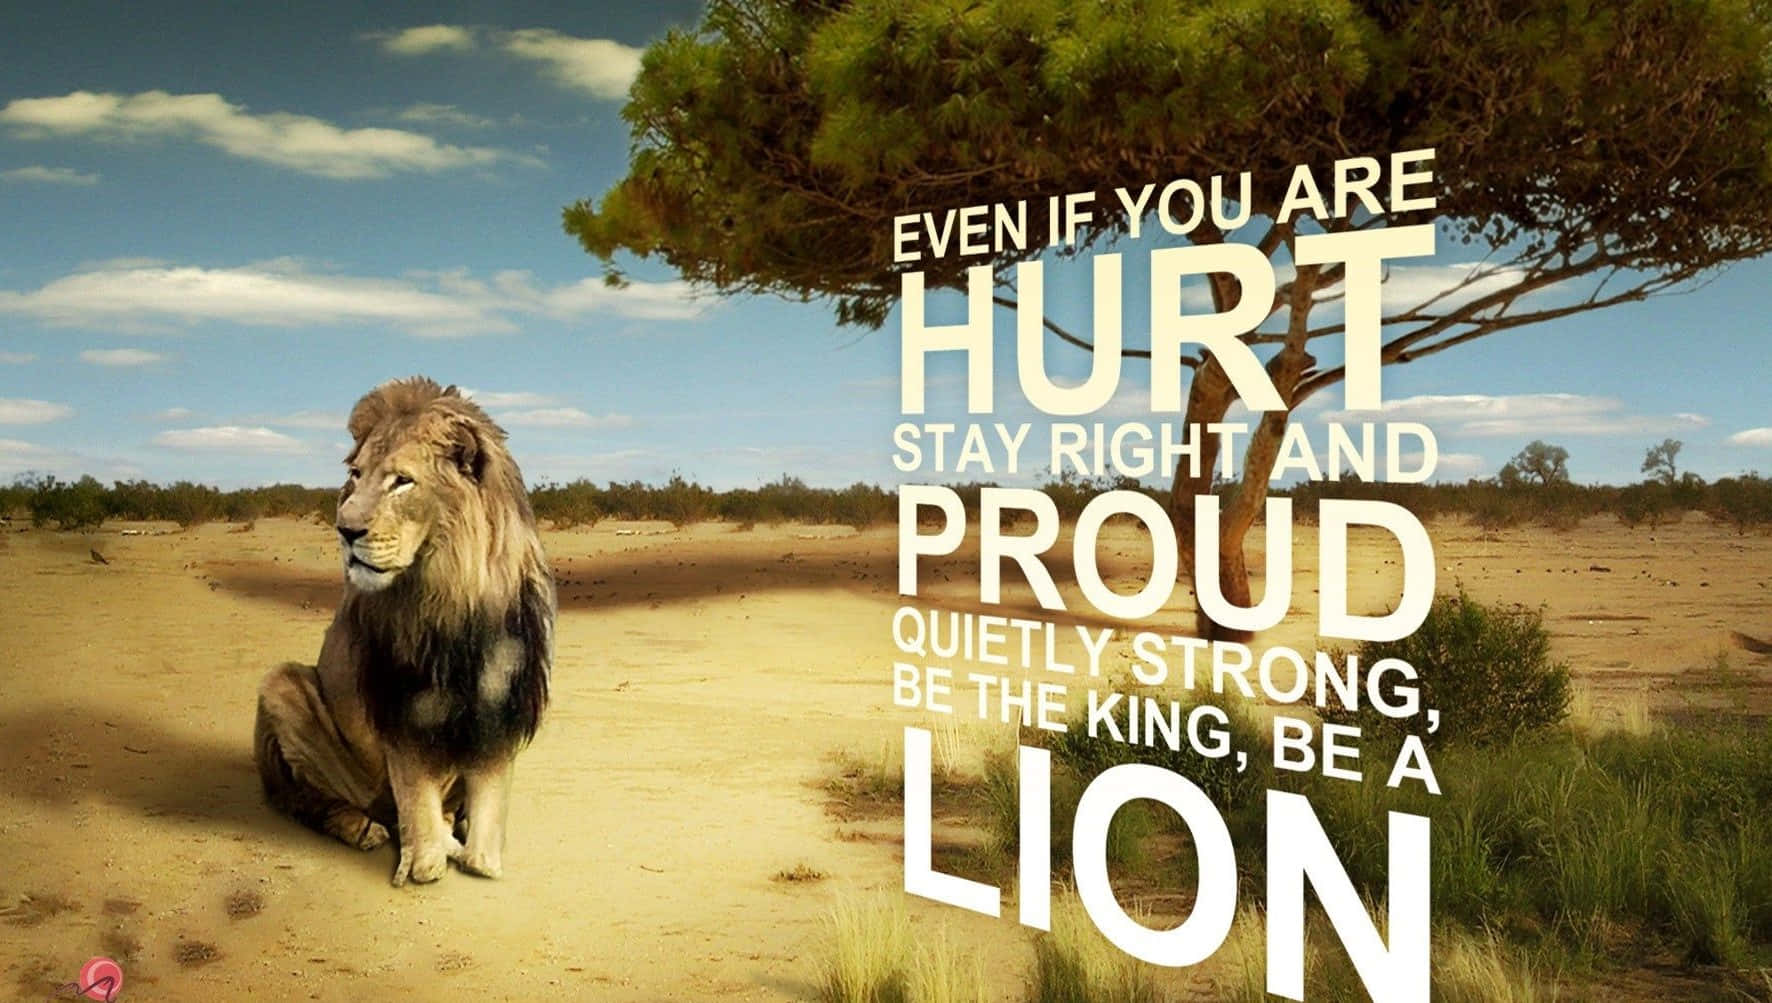 "The lion is a symbol of courage and strength" Wallpaper